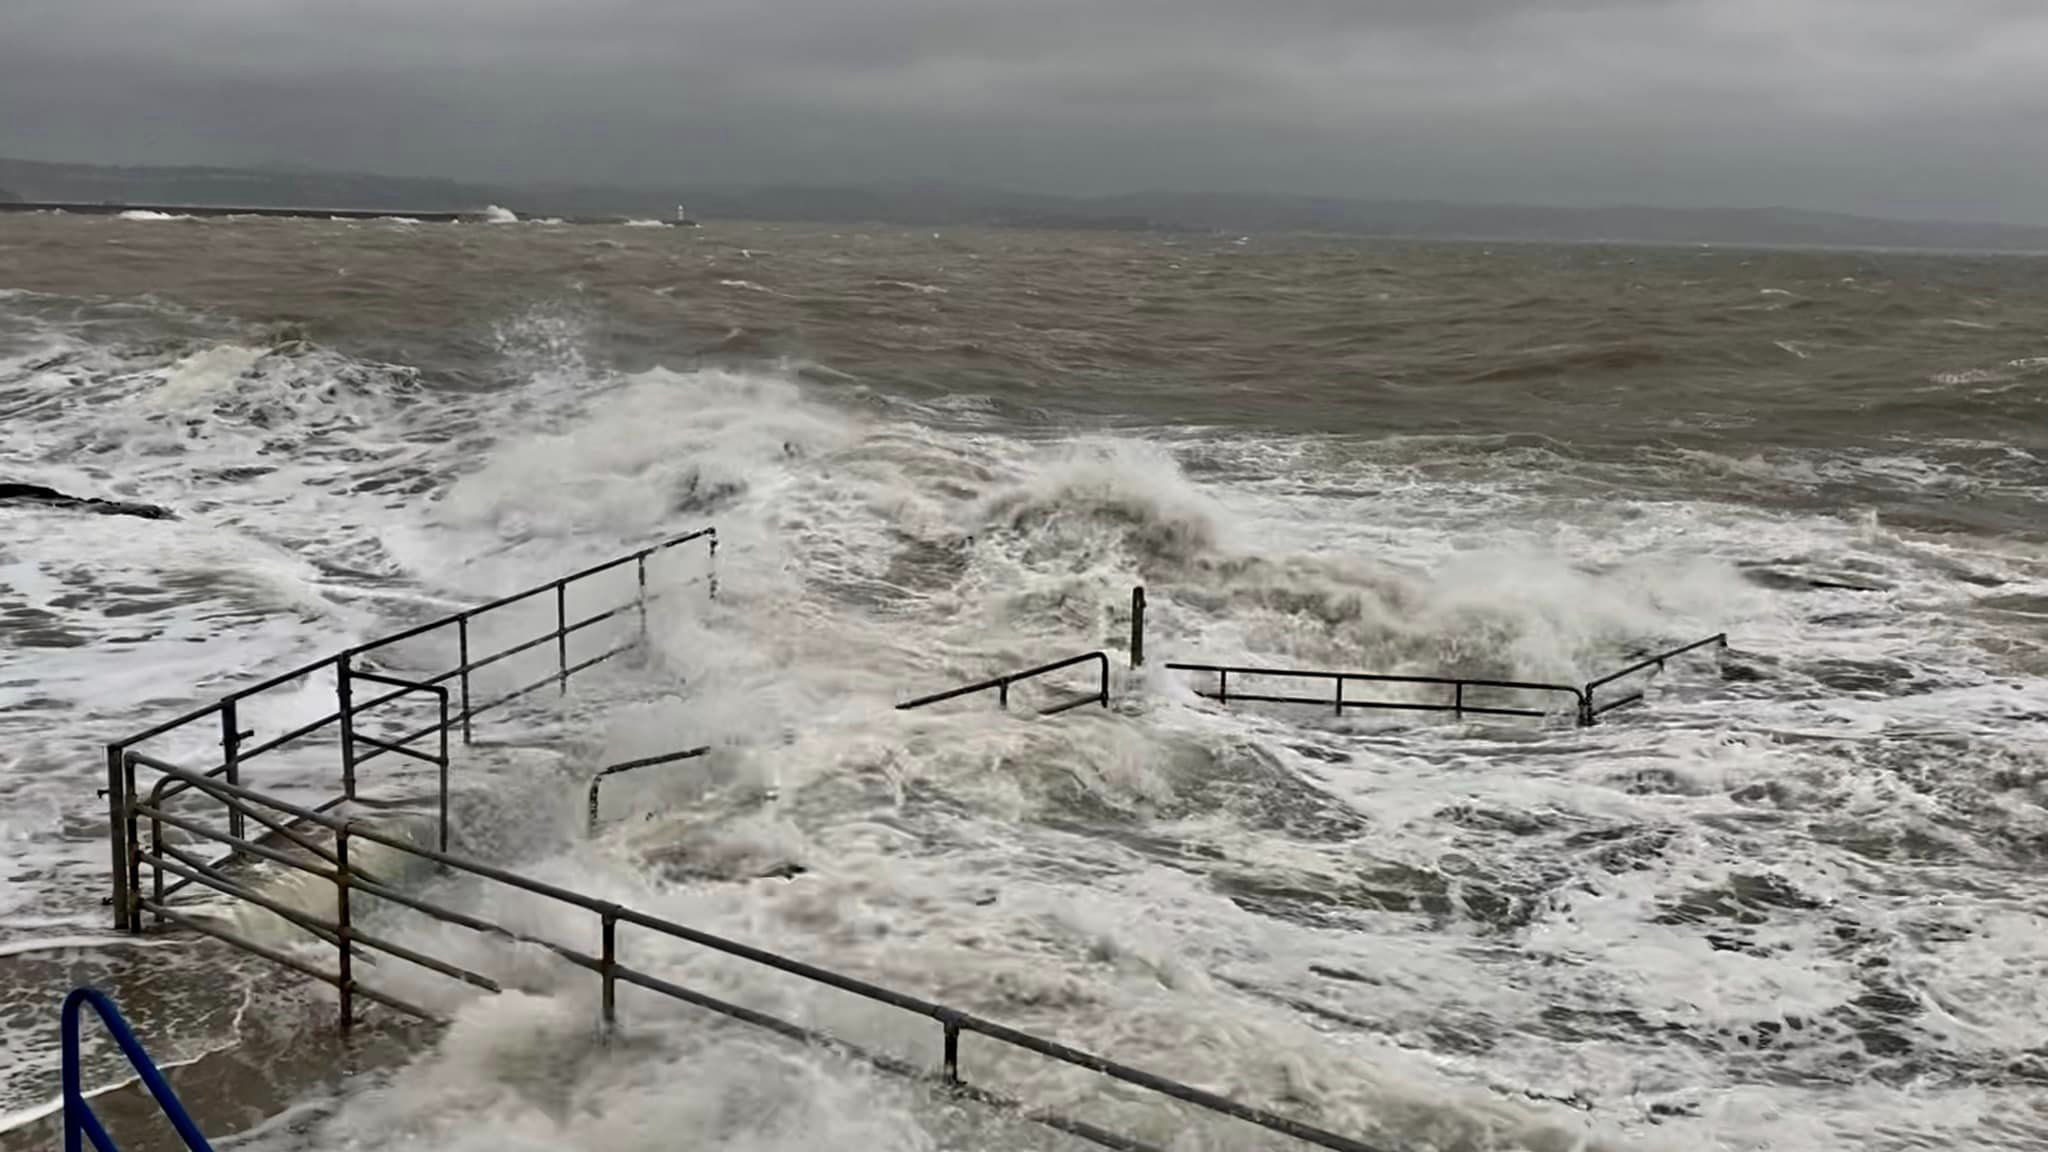 The Shoalstone Seawater Pool in Brixham, Devon, was badly damaged by Storm Babet